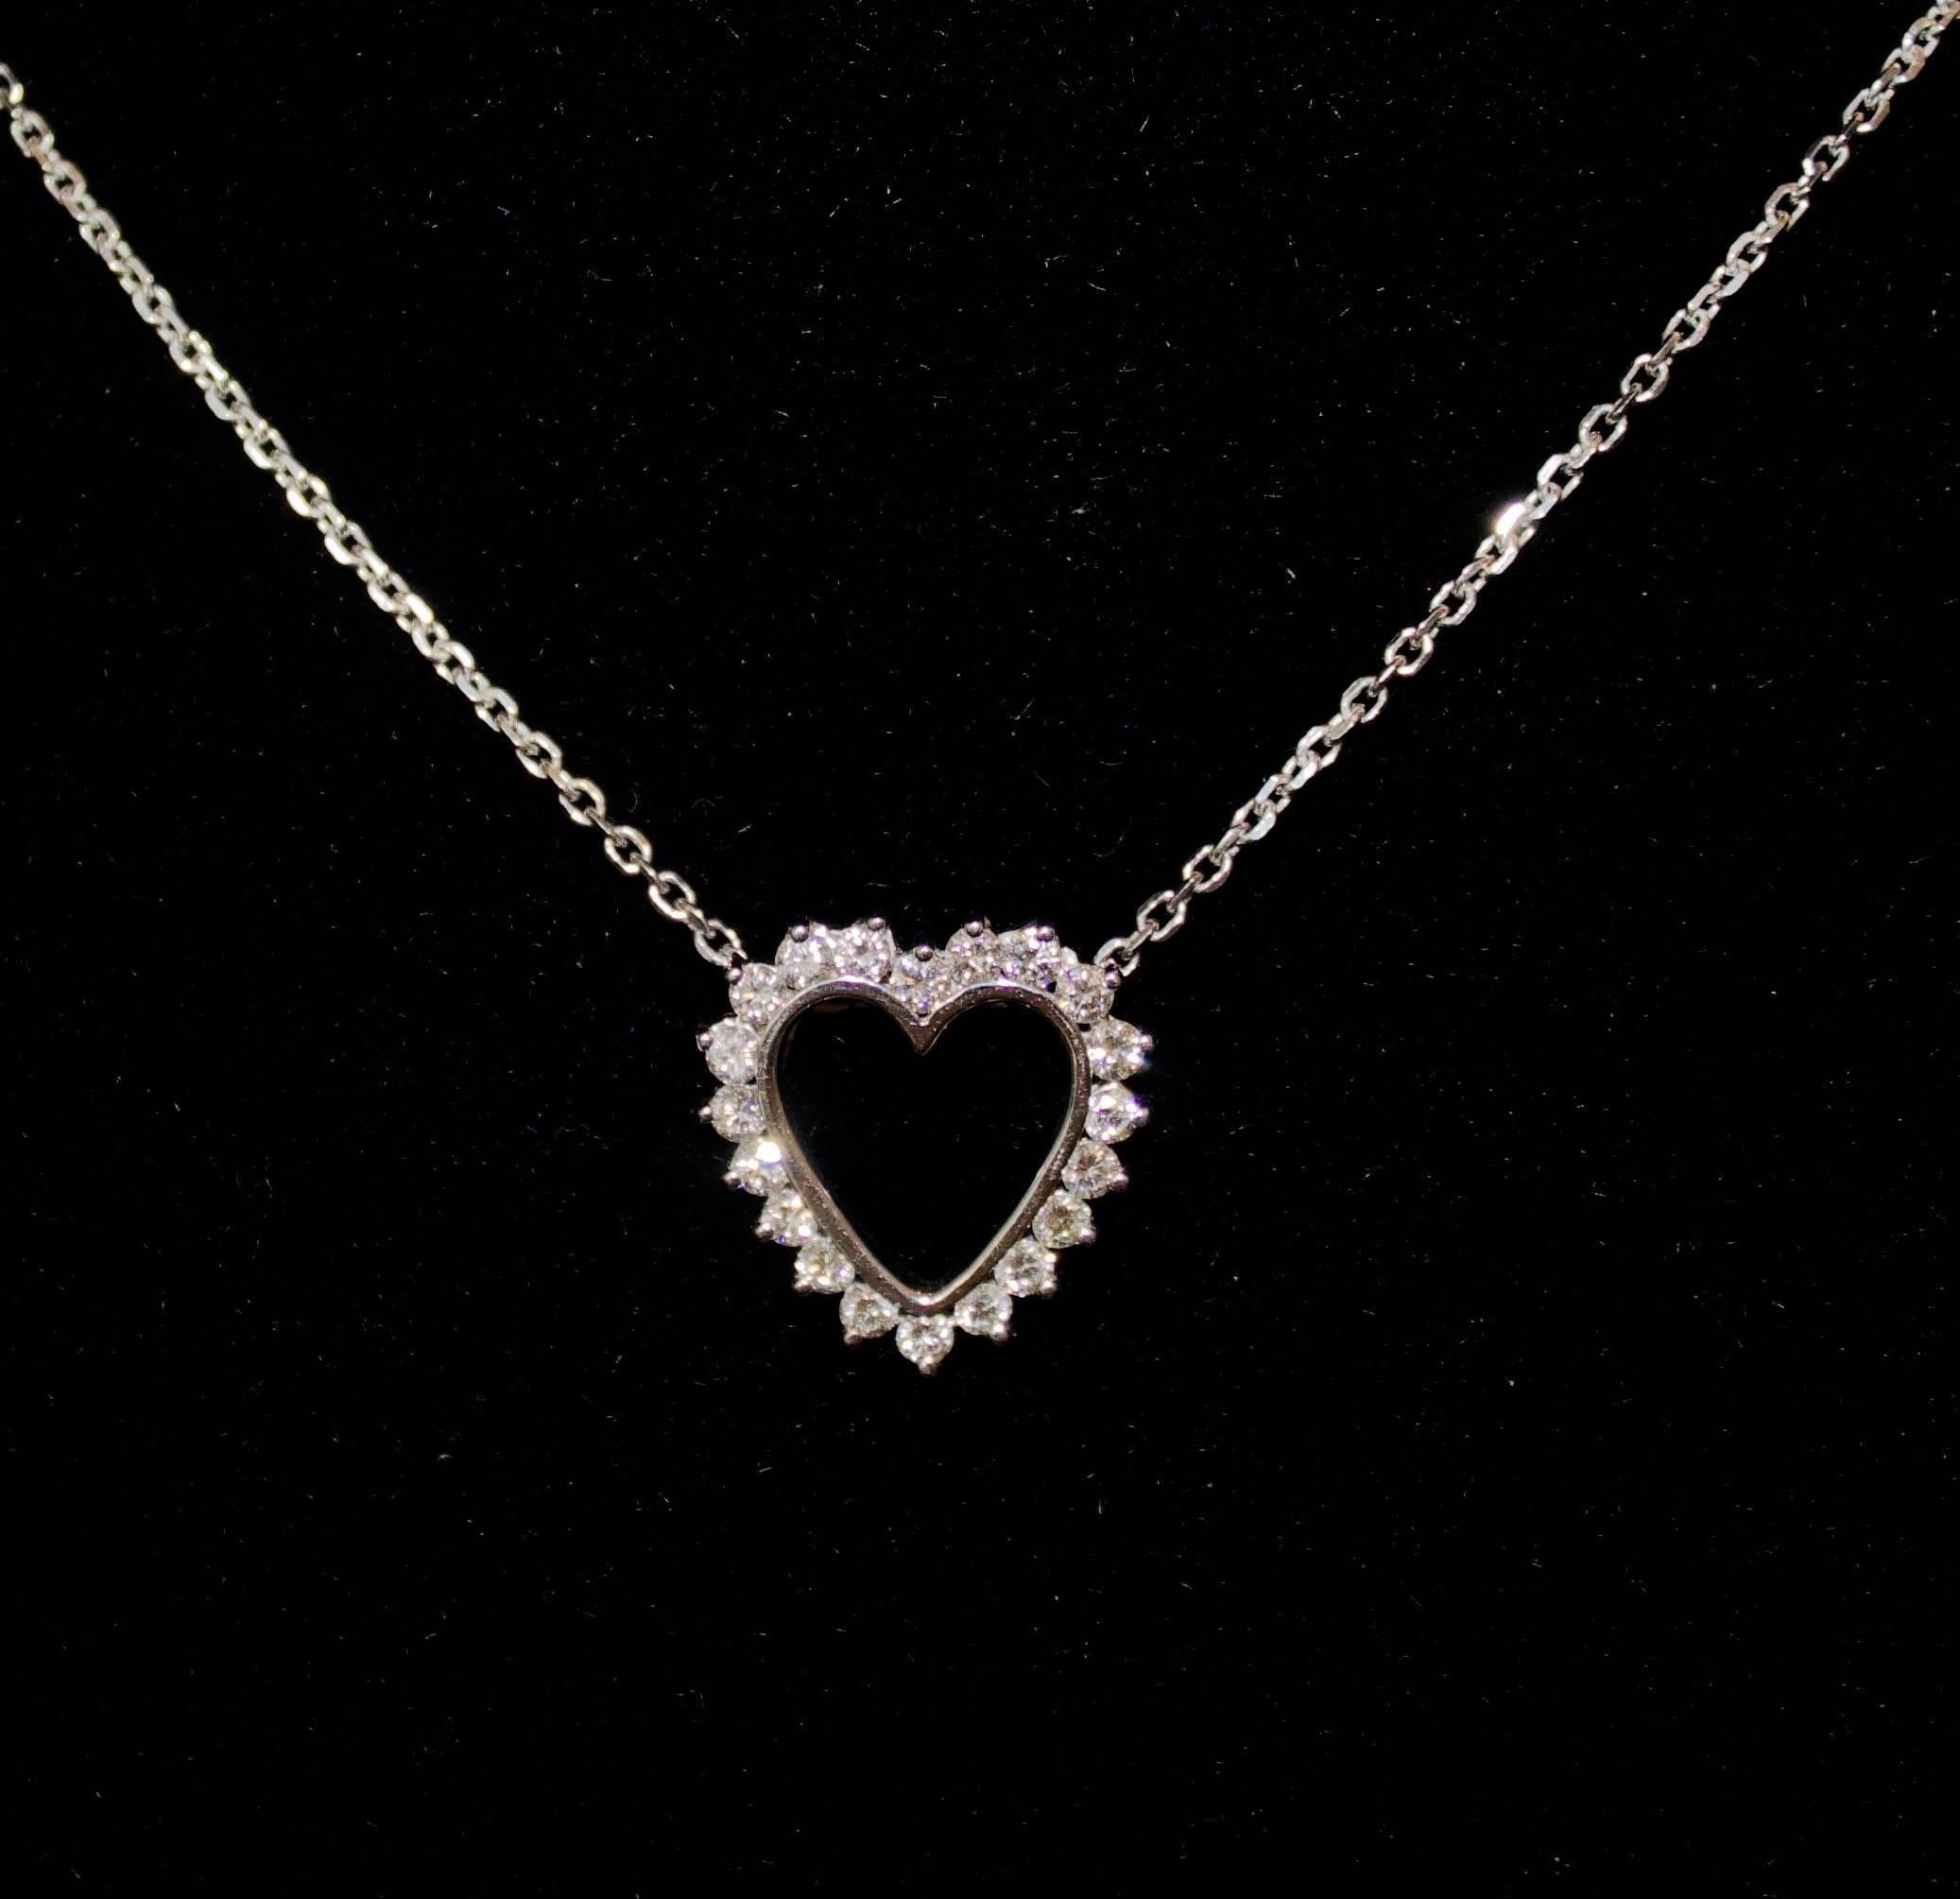 The Classic Diamond Heart Necklace in White Gold
Twenty Round Brilliant Cut Diamonds weighing 1.00 carats approximately
From Betty White to Kim Karda....  (I can't even write the name) Celebrities and Regular Folk have Embraced this Classic